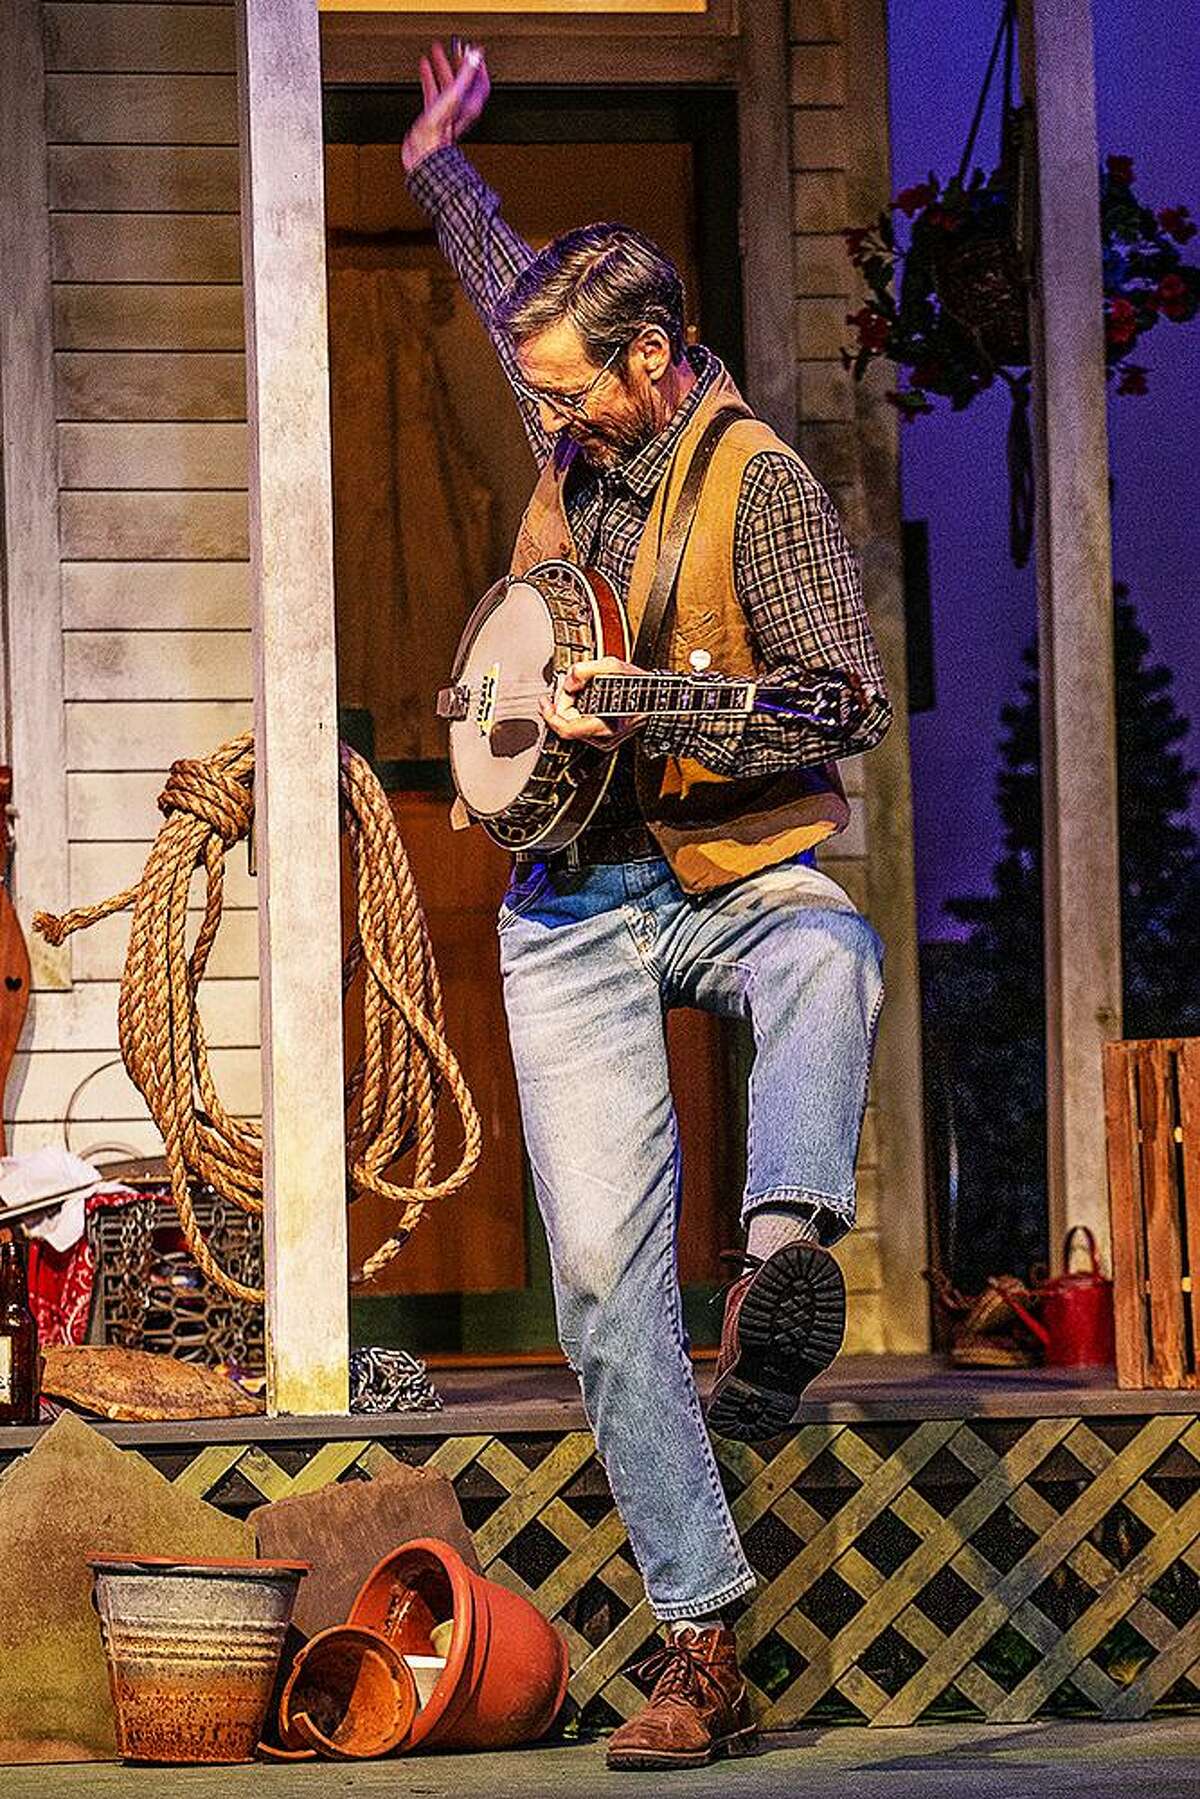 Ivoryton Playhouse’s in Essex is presenting “Ring of Fire The Music of Johnny Cash” through Sept. 11. David Lutken is shown here.